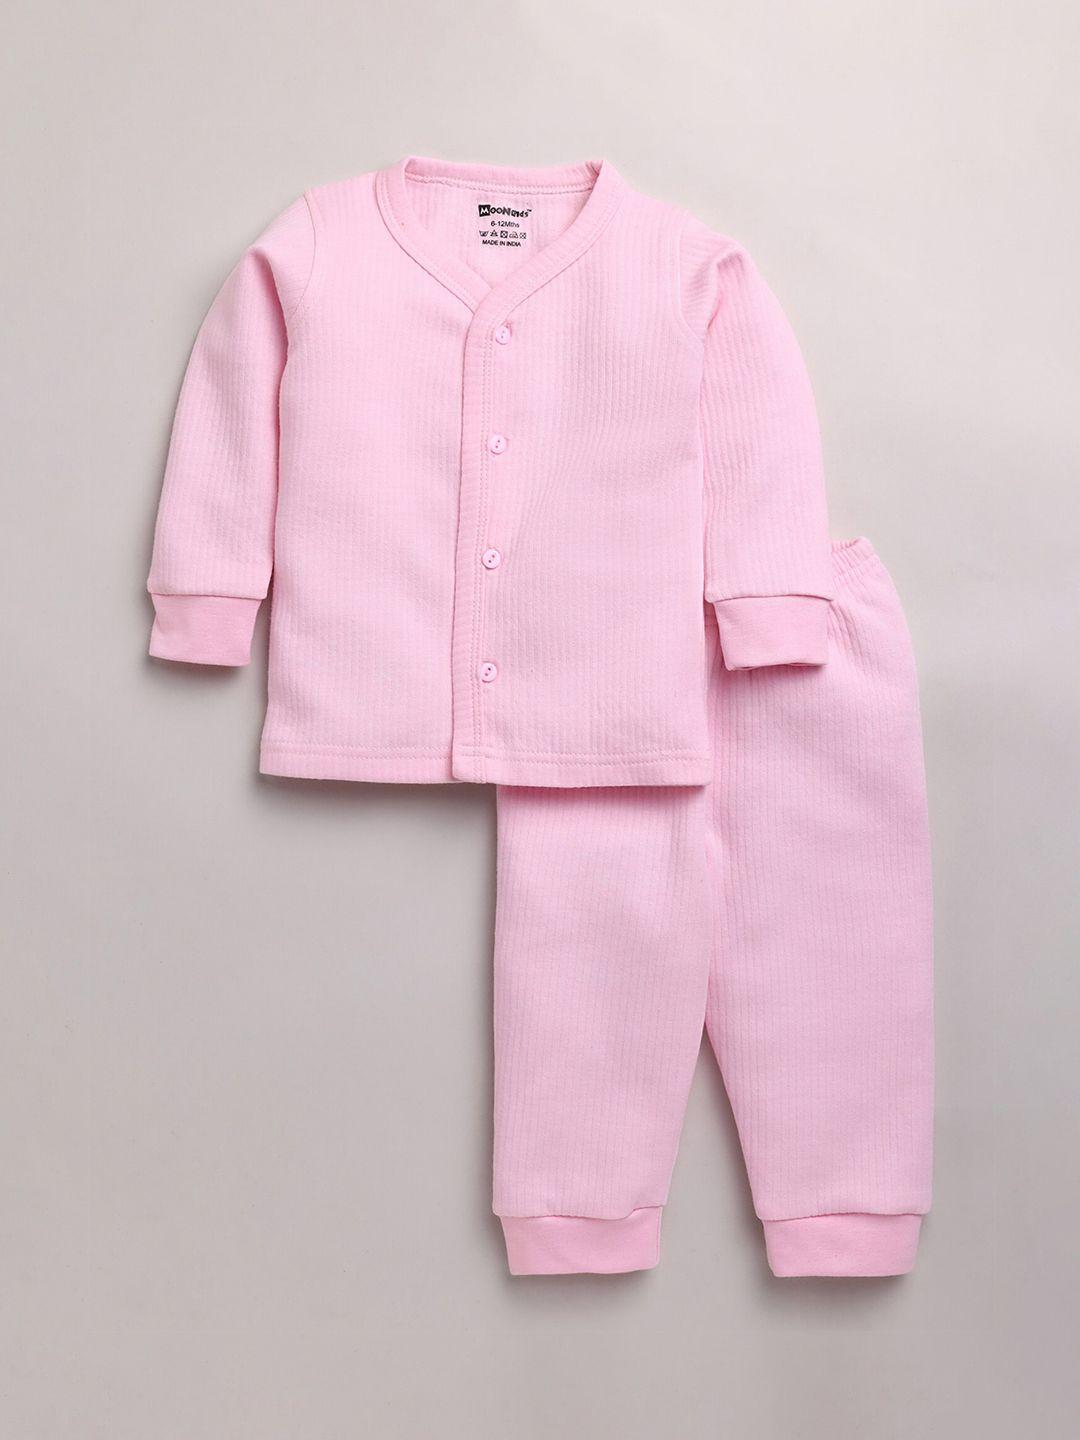 moonkids boys pink solid thermal set